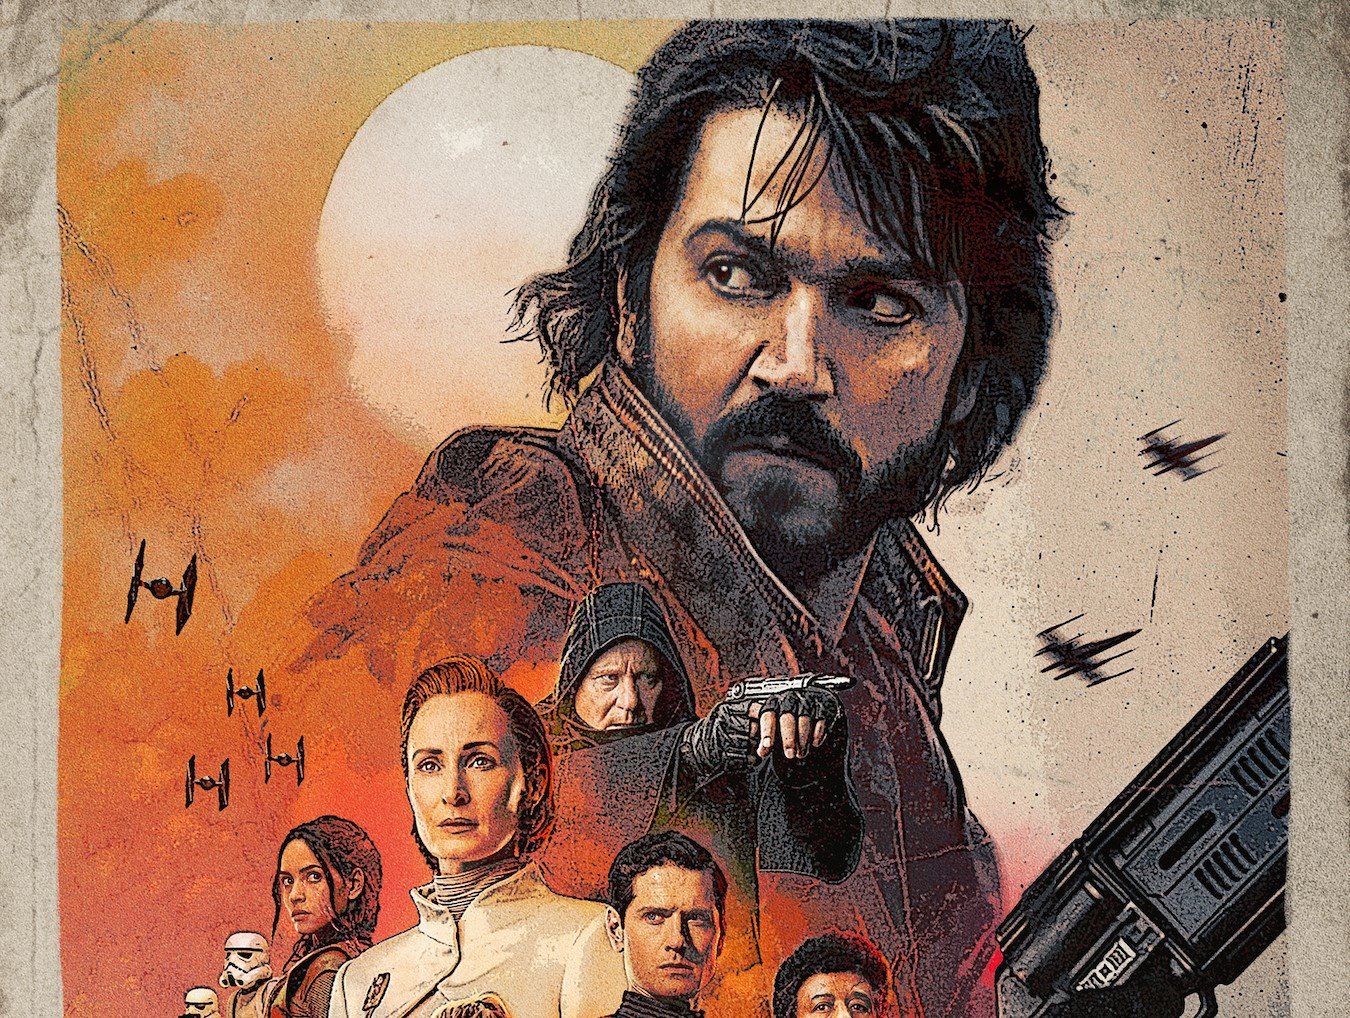 'Andor' key art for our article about where the Disney+ show falls on the 'Star Wars' timeline. It features Diego Luna as Cassian Andor, as well as several other key characters. The background features a moon and is white and orange.